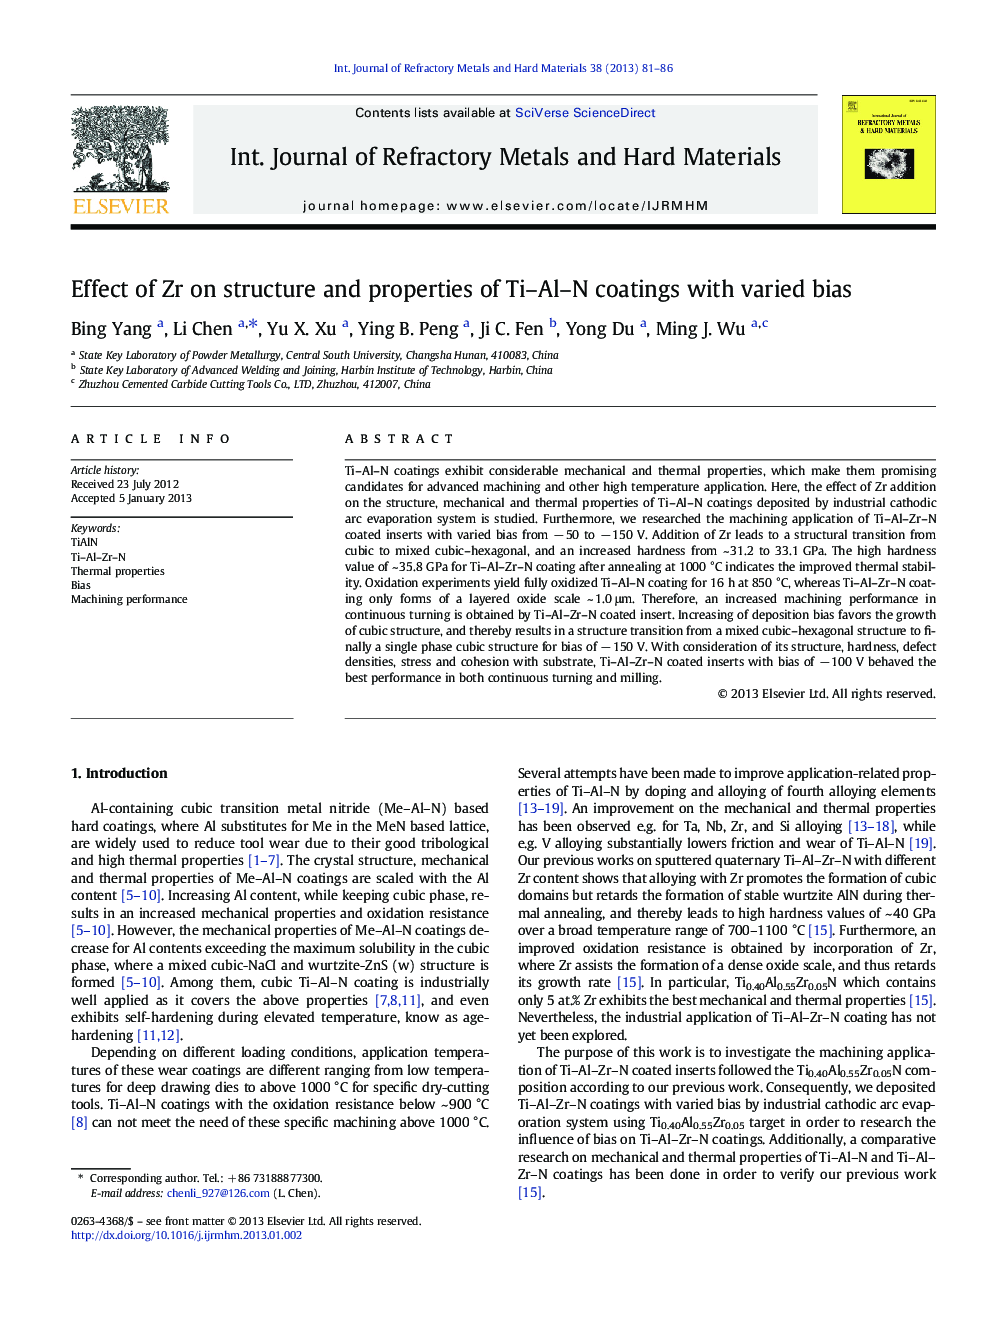 Effect of Zr on structure and properties of Ti–Al–N coatings with varied bias